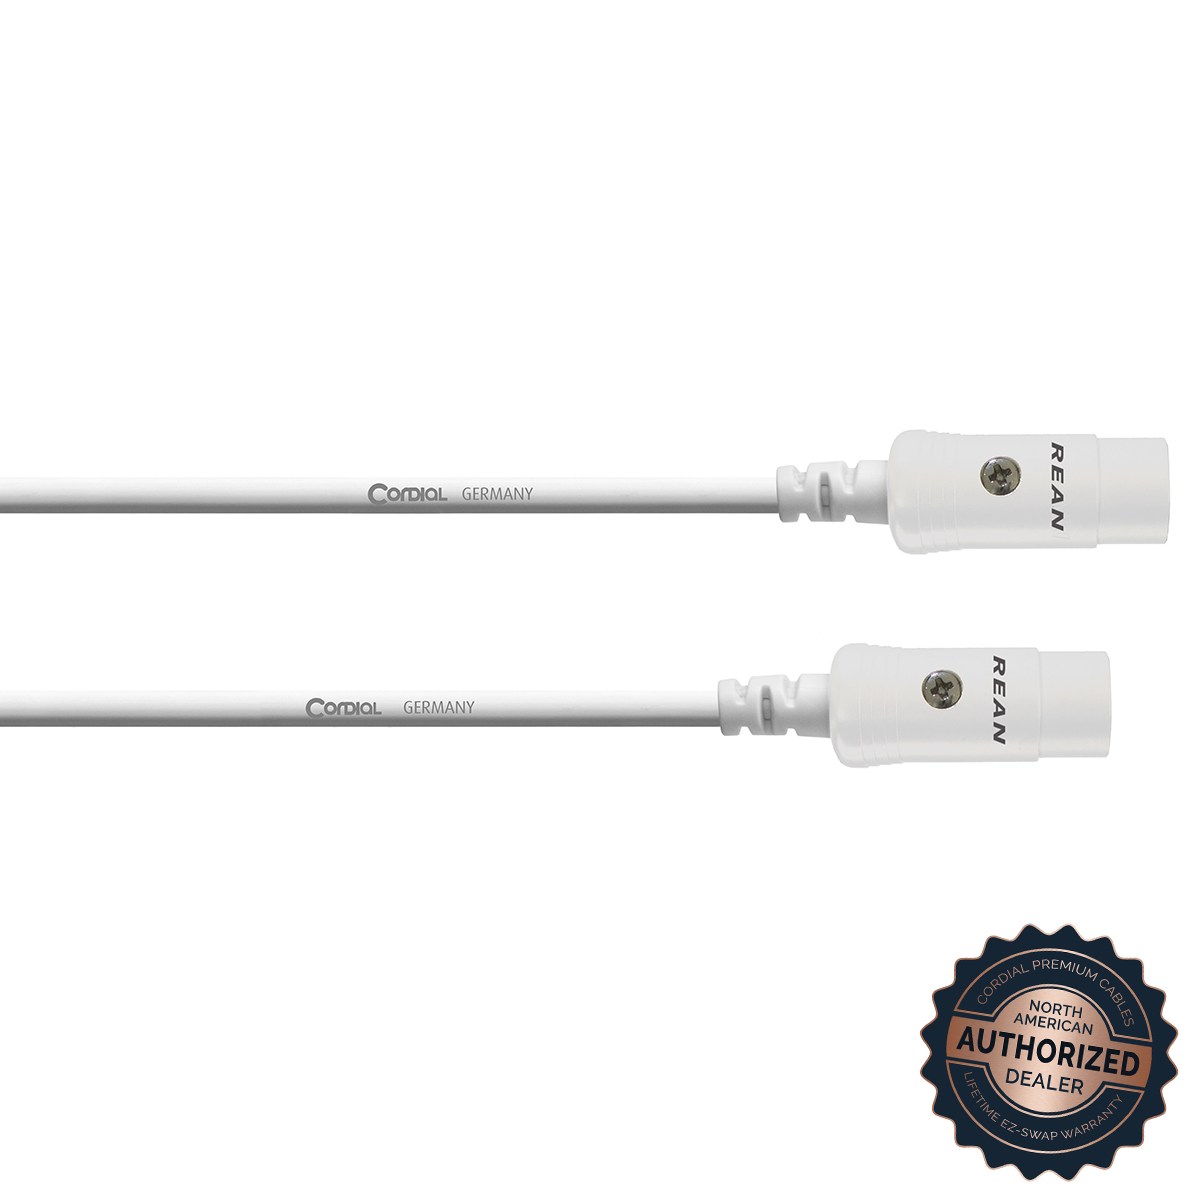 Cordial 5-Pin MIDI Cable; White, 10ft.

SKU: CFD 3 AA - SNOW

5-Pin MIDI to 5-Pin MIDI (standard 3-pin assignment); White, 10ft.